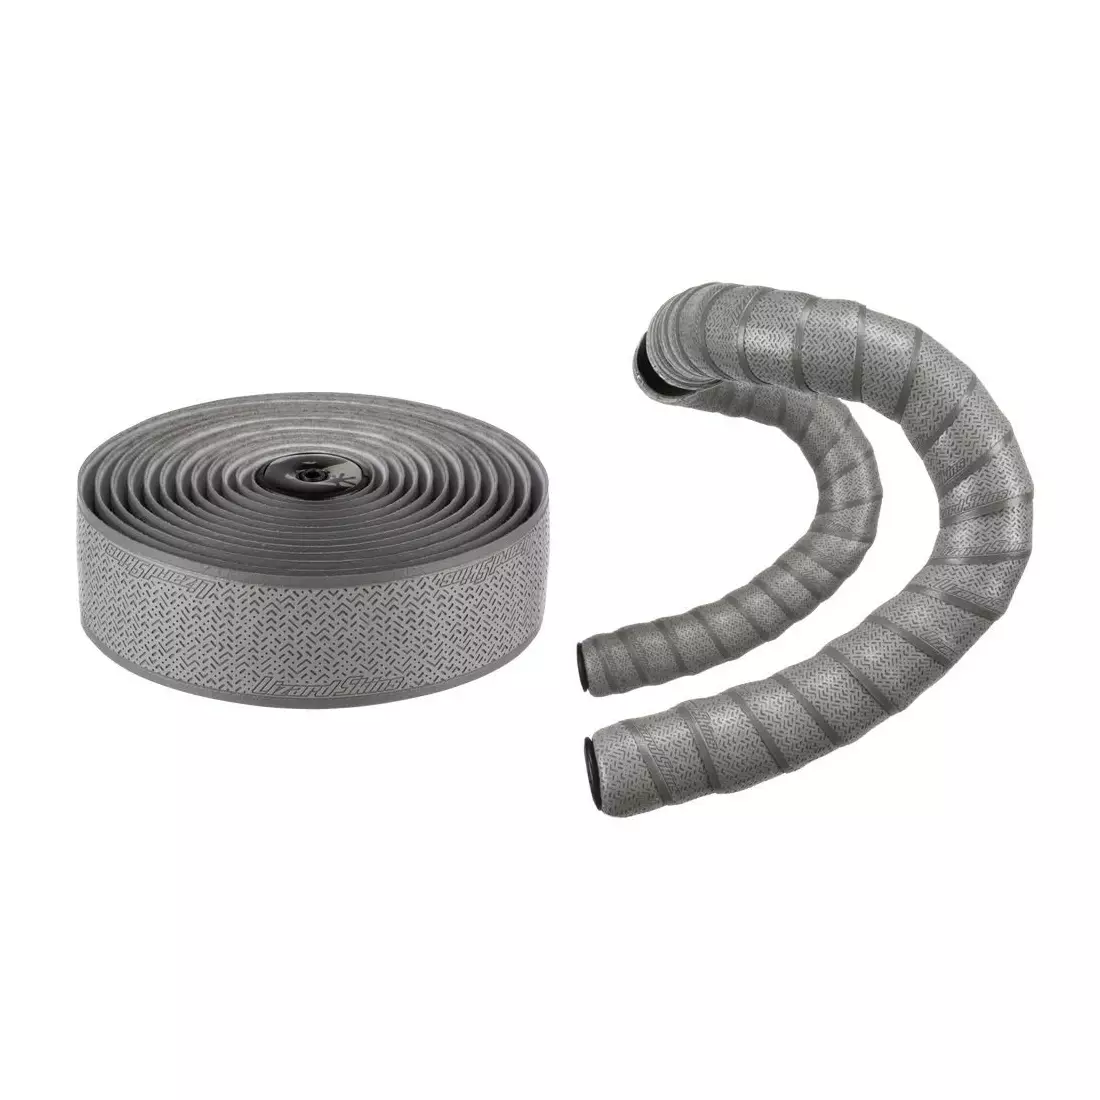 LIZARDSKINS bicycle handlebar wrap dsp 3.2 bar tape 3,2mm cool gray ZS-DSPCY332